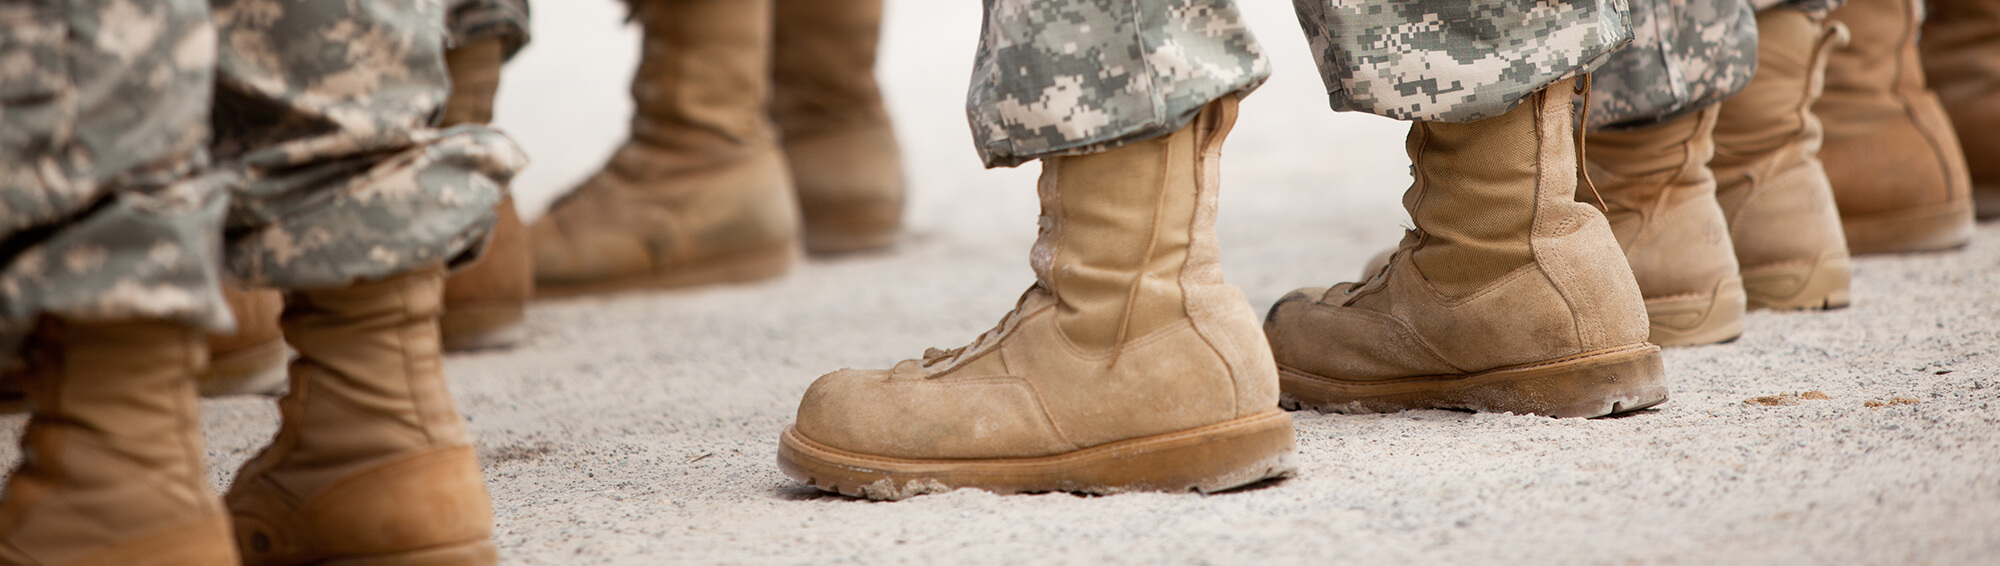 Why Are Veterans Disability Benefits Claims Denied?